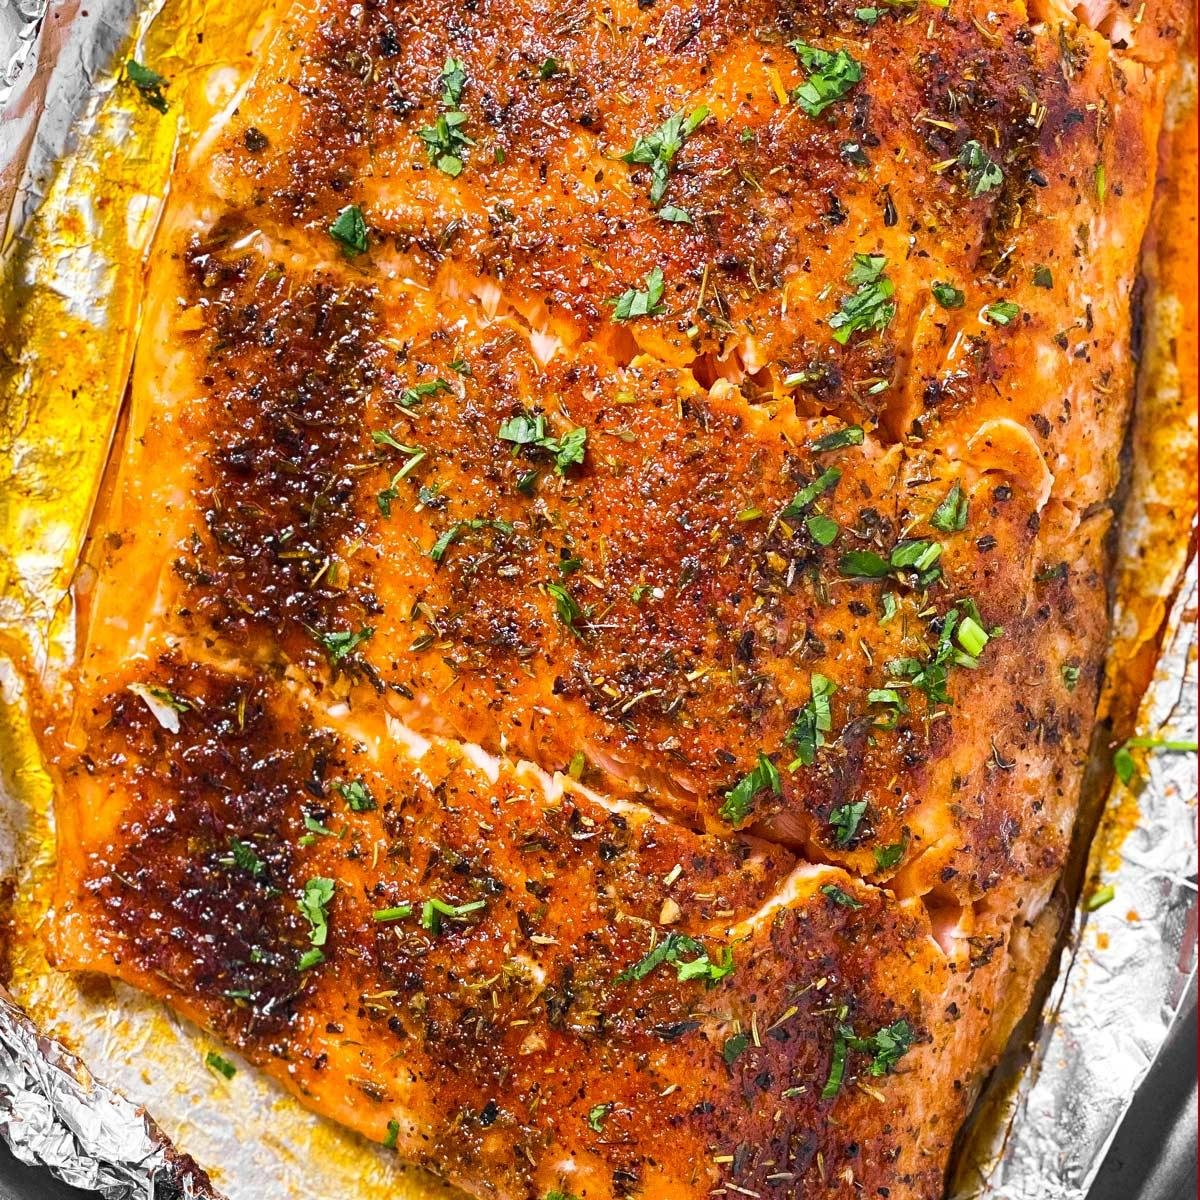 The Perfect Baked Salmon Recipe: A Delicious and Healthy Meal Option